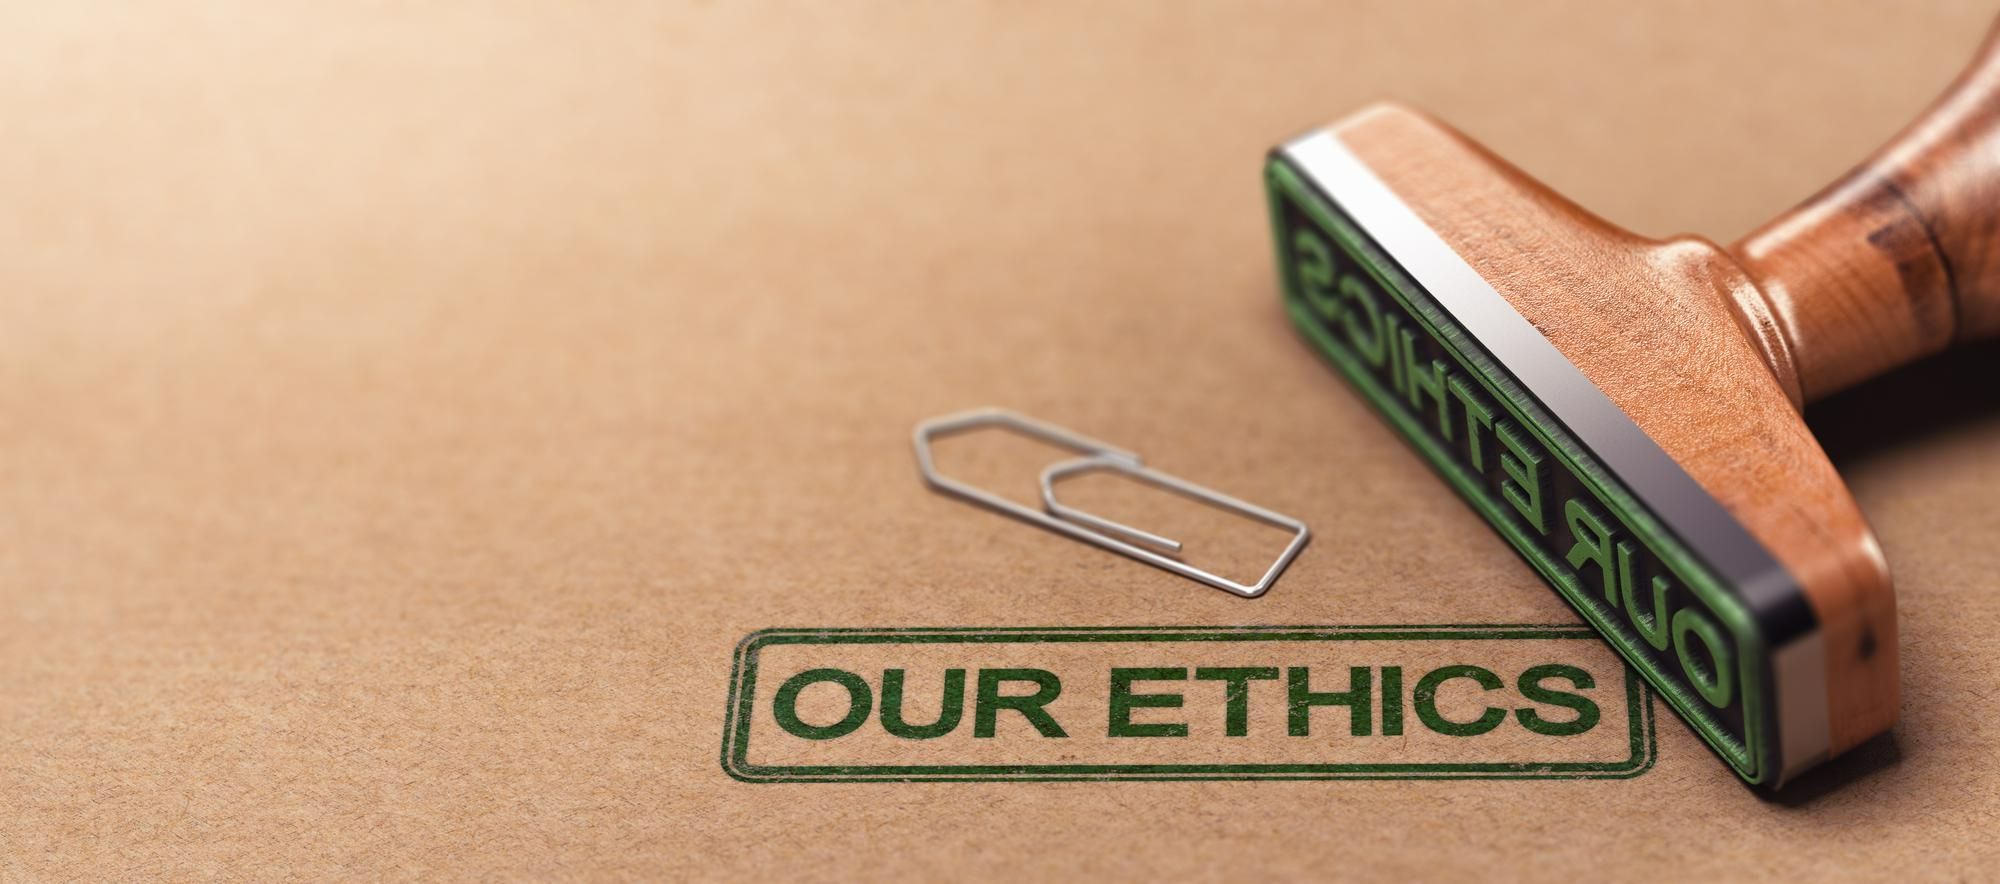 How to select a journal that meets ethical standards